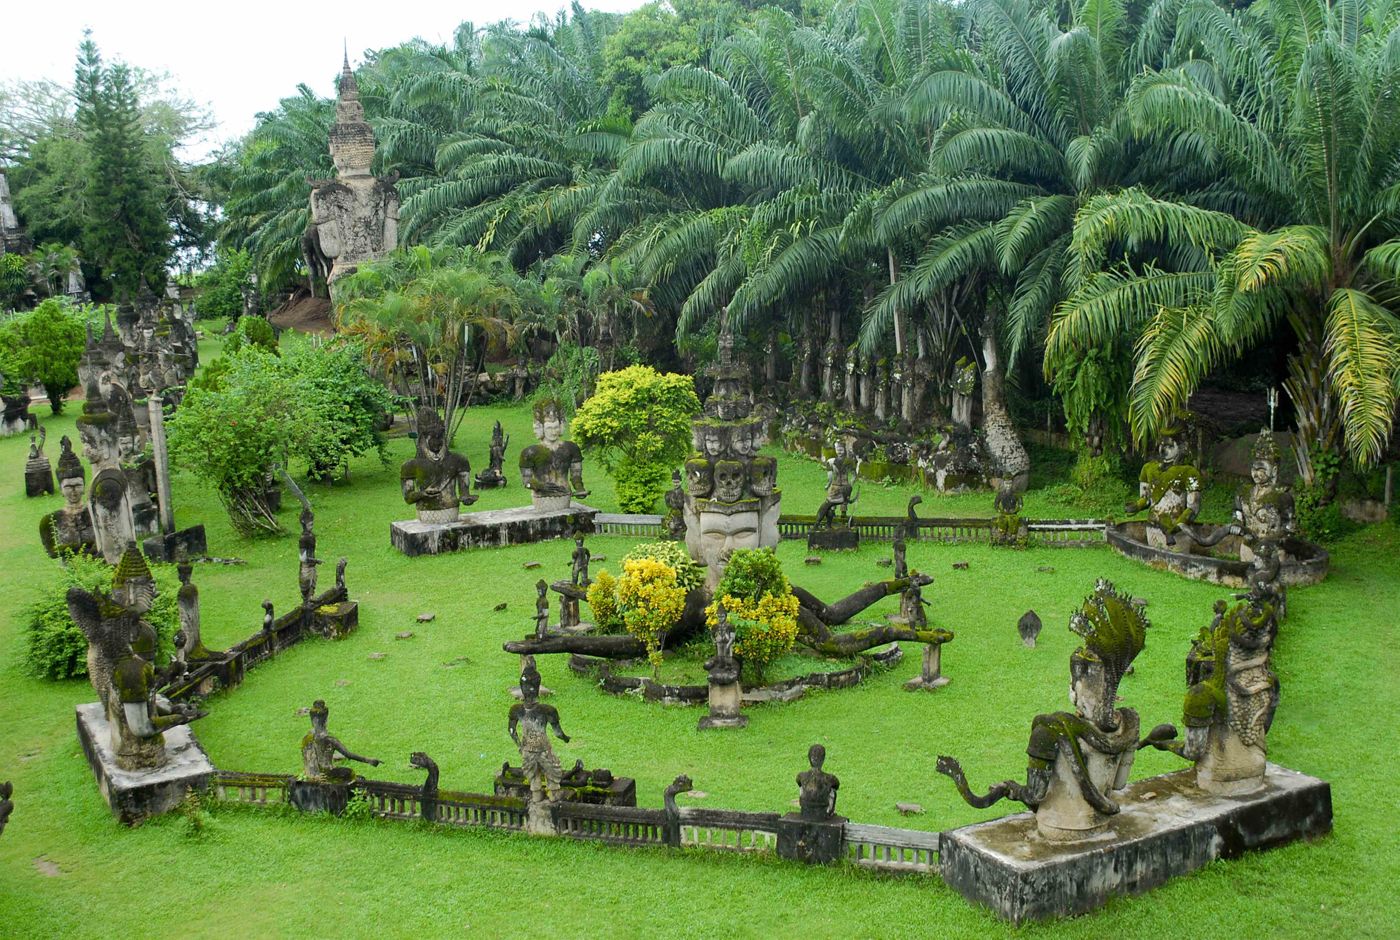 Most Interesting, Unusual and Fun Facts About Laos